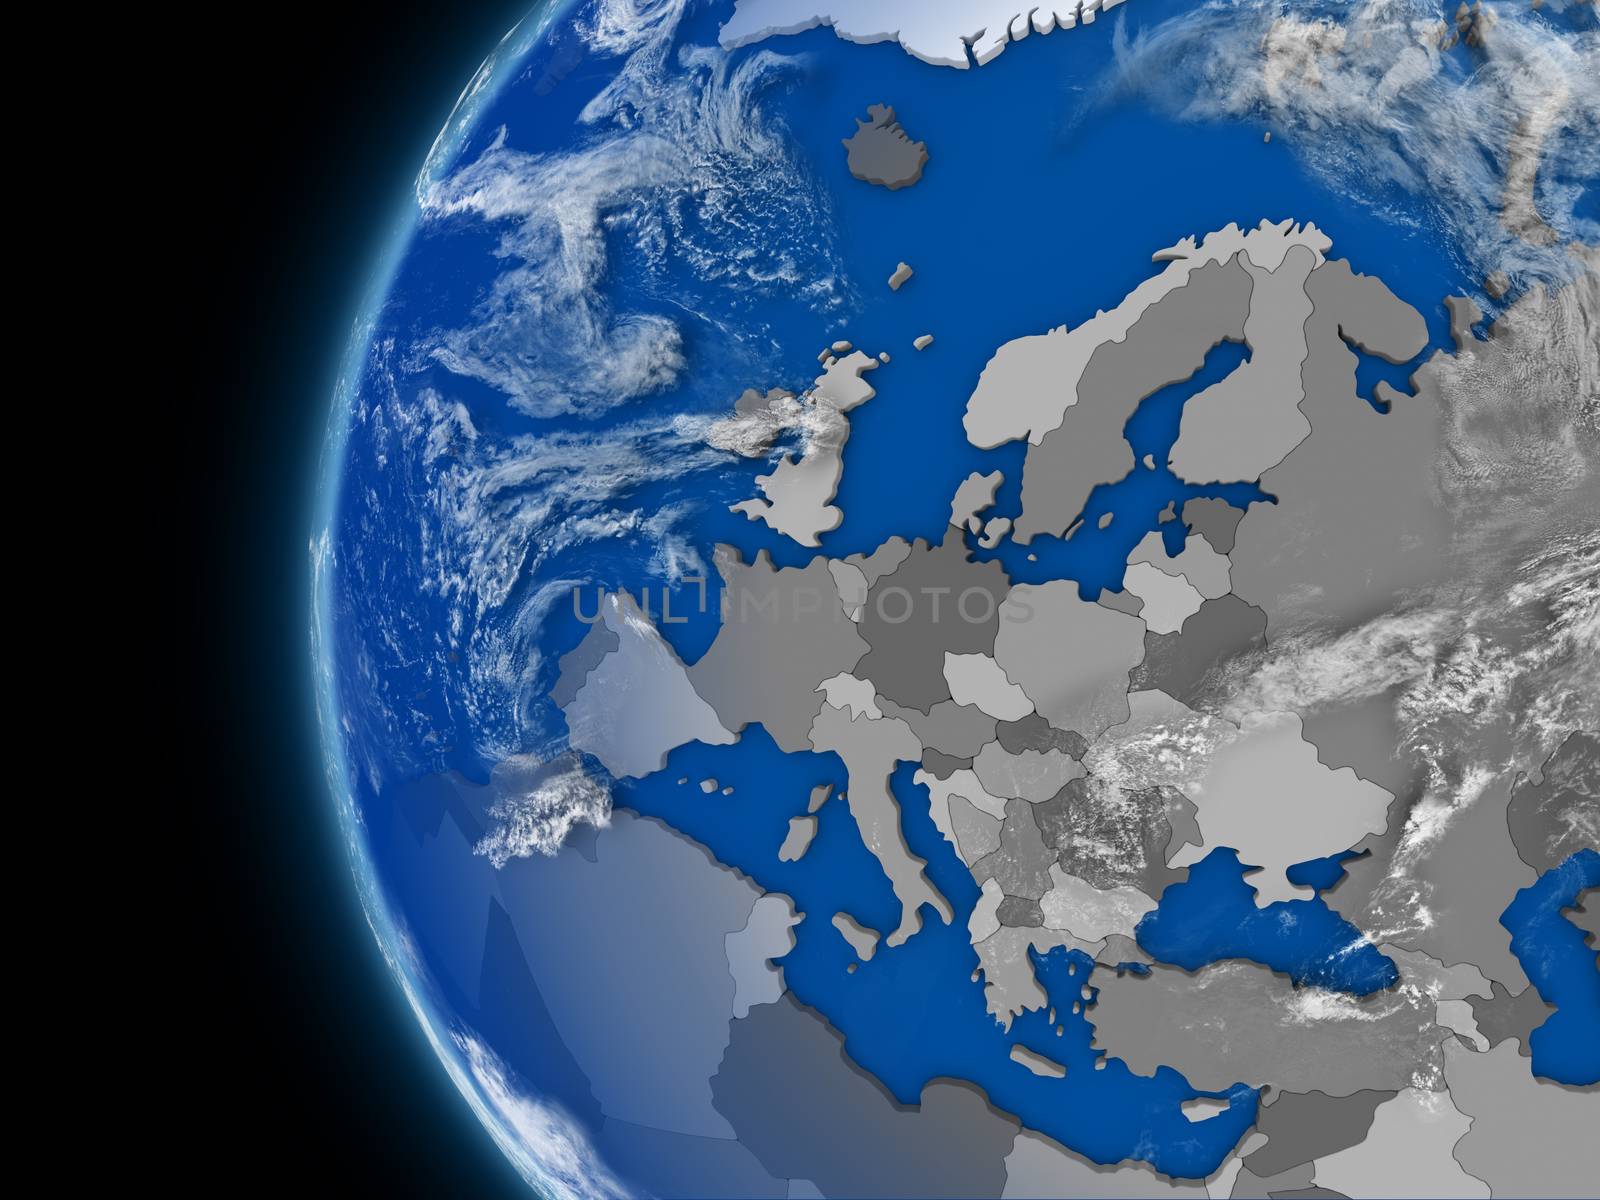 European continent on political globe by Harvepino